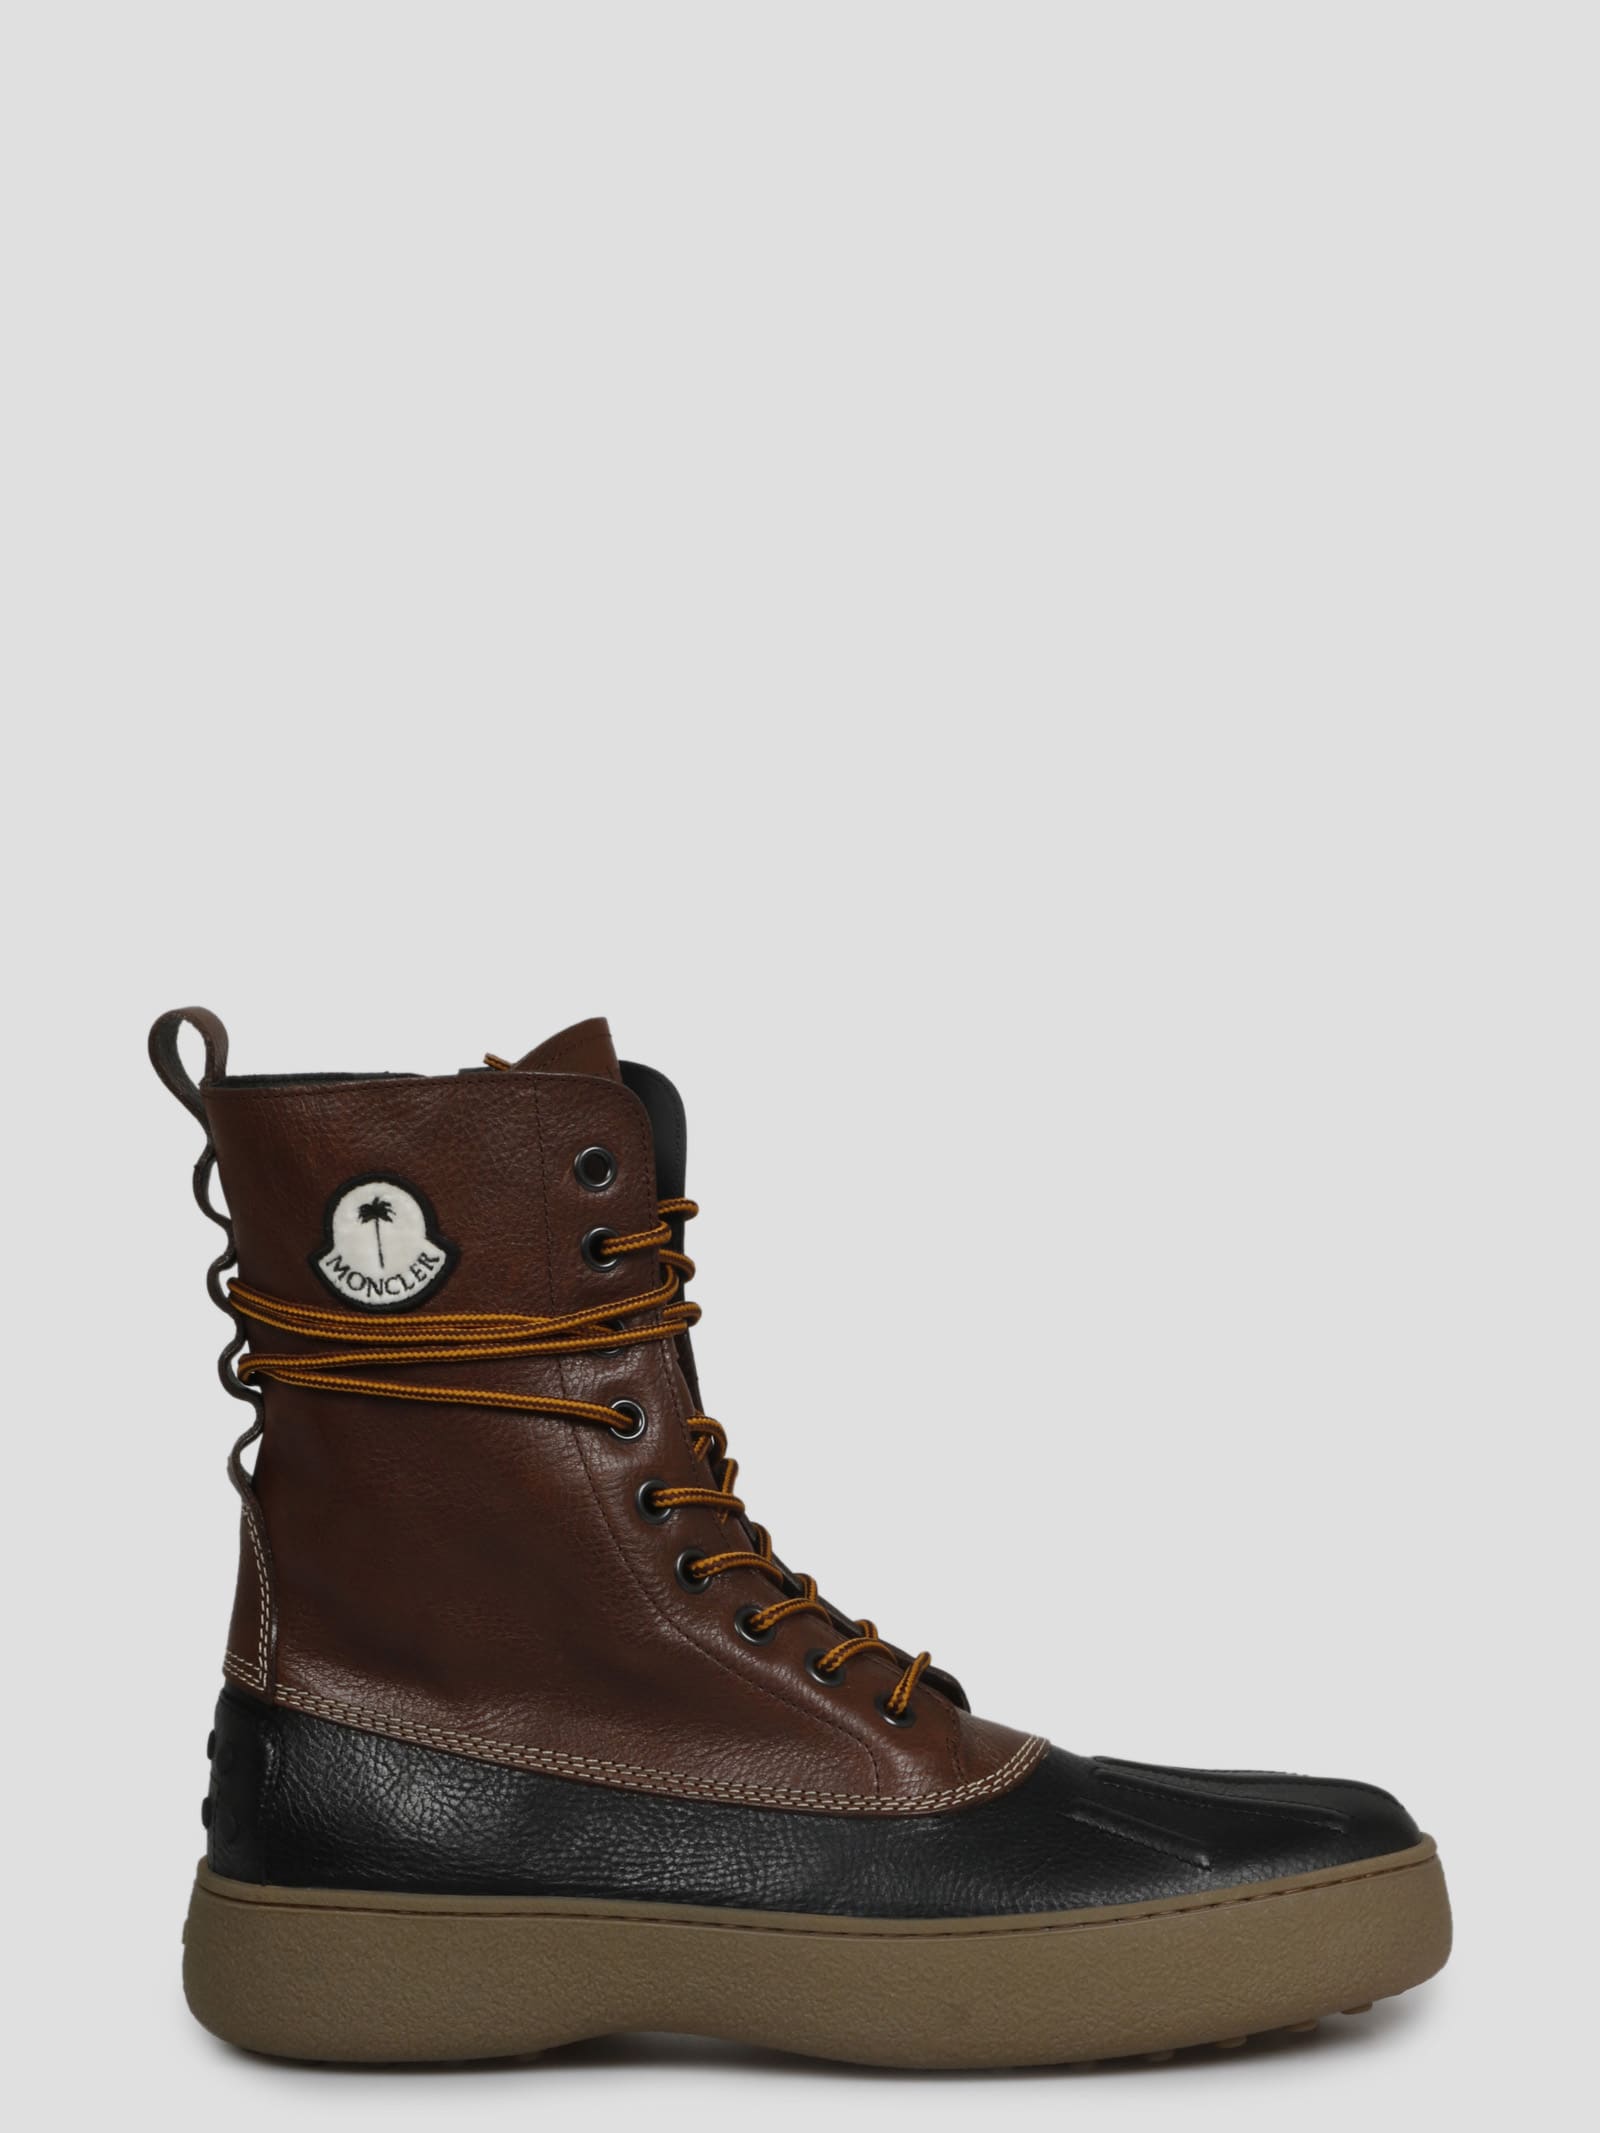 Moncler Genius W.g. Mid Leather Boots